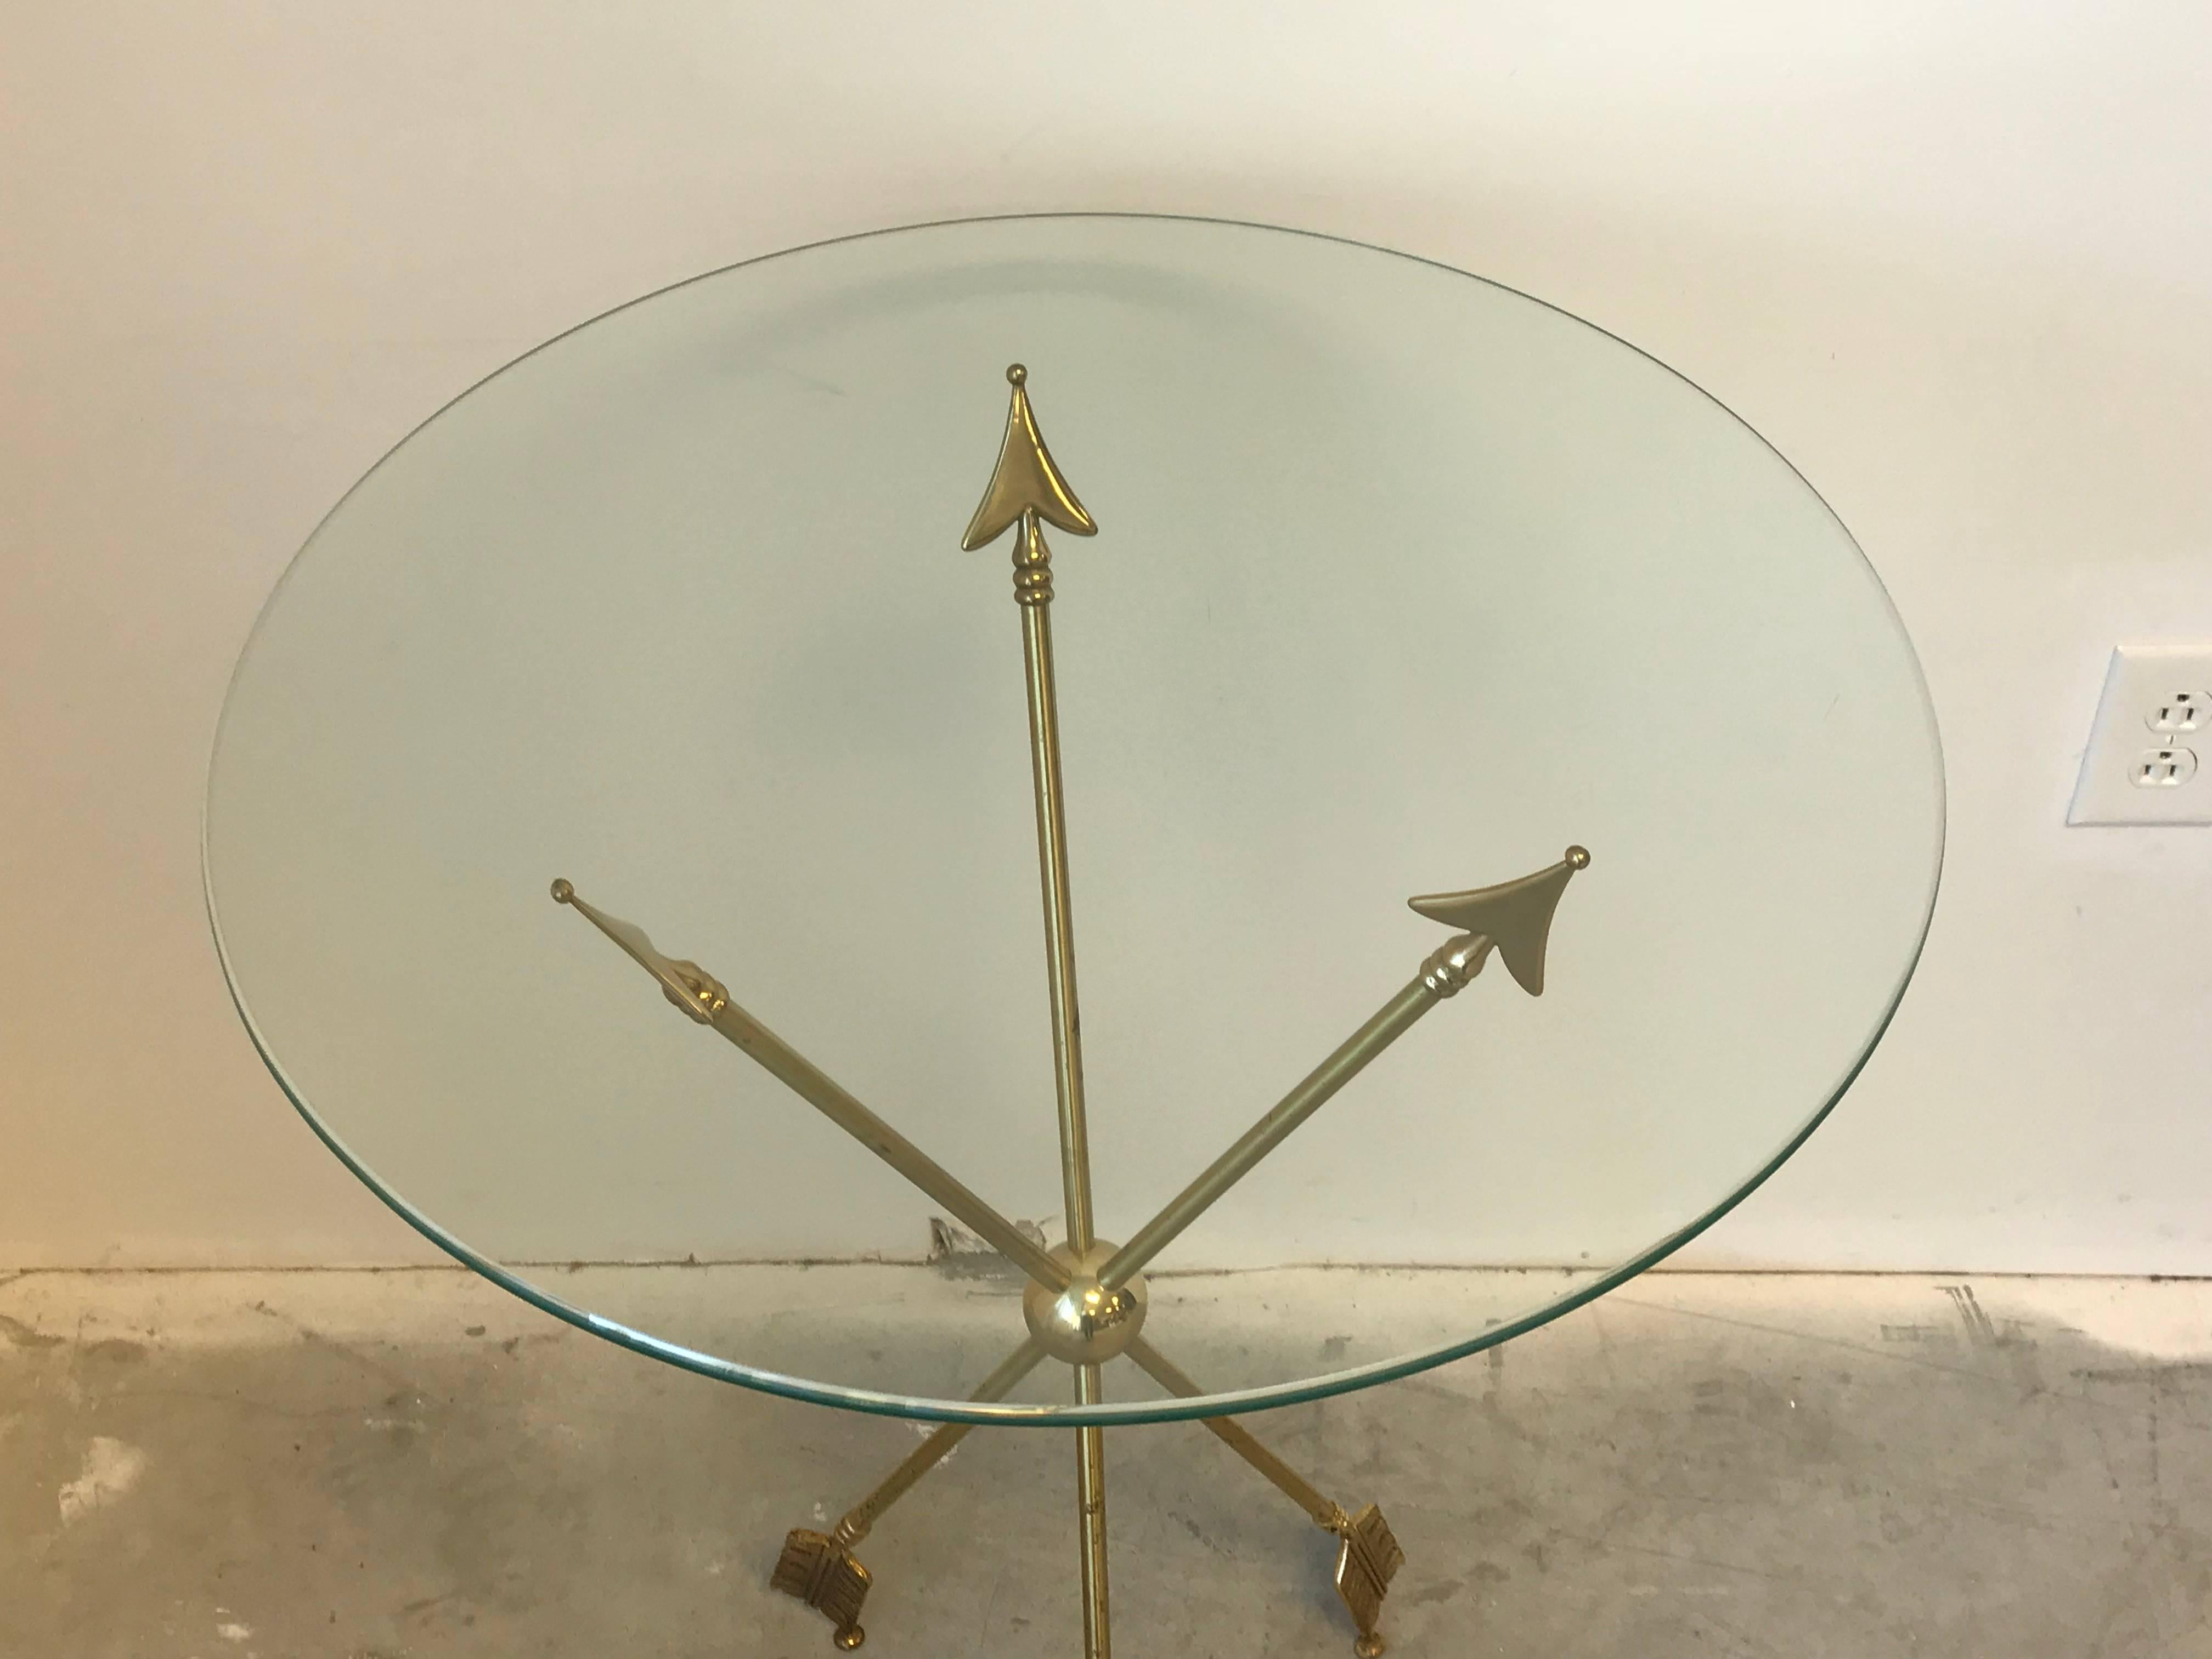 Fantastic brass arrow tripod table by Maison Jansen in the Directoire style with a 23.5